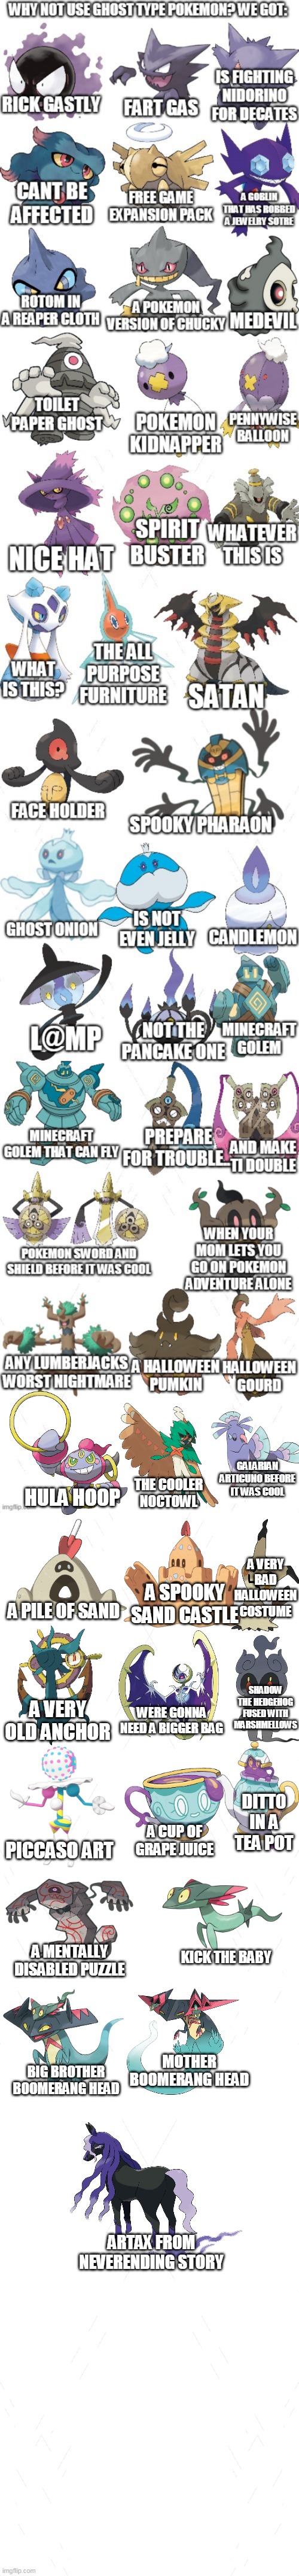 ghost type pokemon be like | GALARIAN ARTICUNO BEFORE IT WAS COOL; THE COOLER NOCTOWL; HULA HOOP; A VERY BAD HALLOWEEN COSTUME; A SPOOKY SAND CASTLE; A PILE OF SAND; SHADOW THE HEDGEHOG FUSED WITH MARSHMELLOWS; WERE GONNA NEED A BIGGER BAG; A VERY OLD ANCHOR; DITTO IN A TEA POT; A CUP OF GRAPE JUICE; PICCASO ART; A MENTALLY DISABLED PUZZLE; KICK THE BABY; MOTHER BOOMERANG HEAD; BIG BROTHER BOOMERANG HEAD; ARTAX FROM NEVERENDING STORY | image tagged in memes,funny,pokemon | made w/ Imgflip meme maker